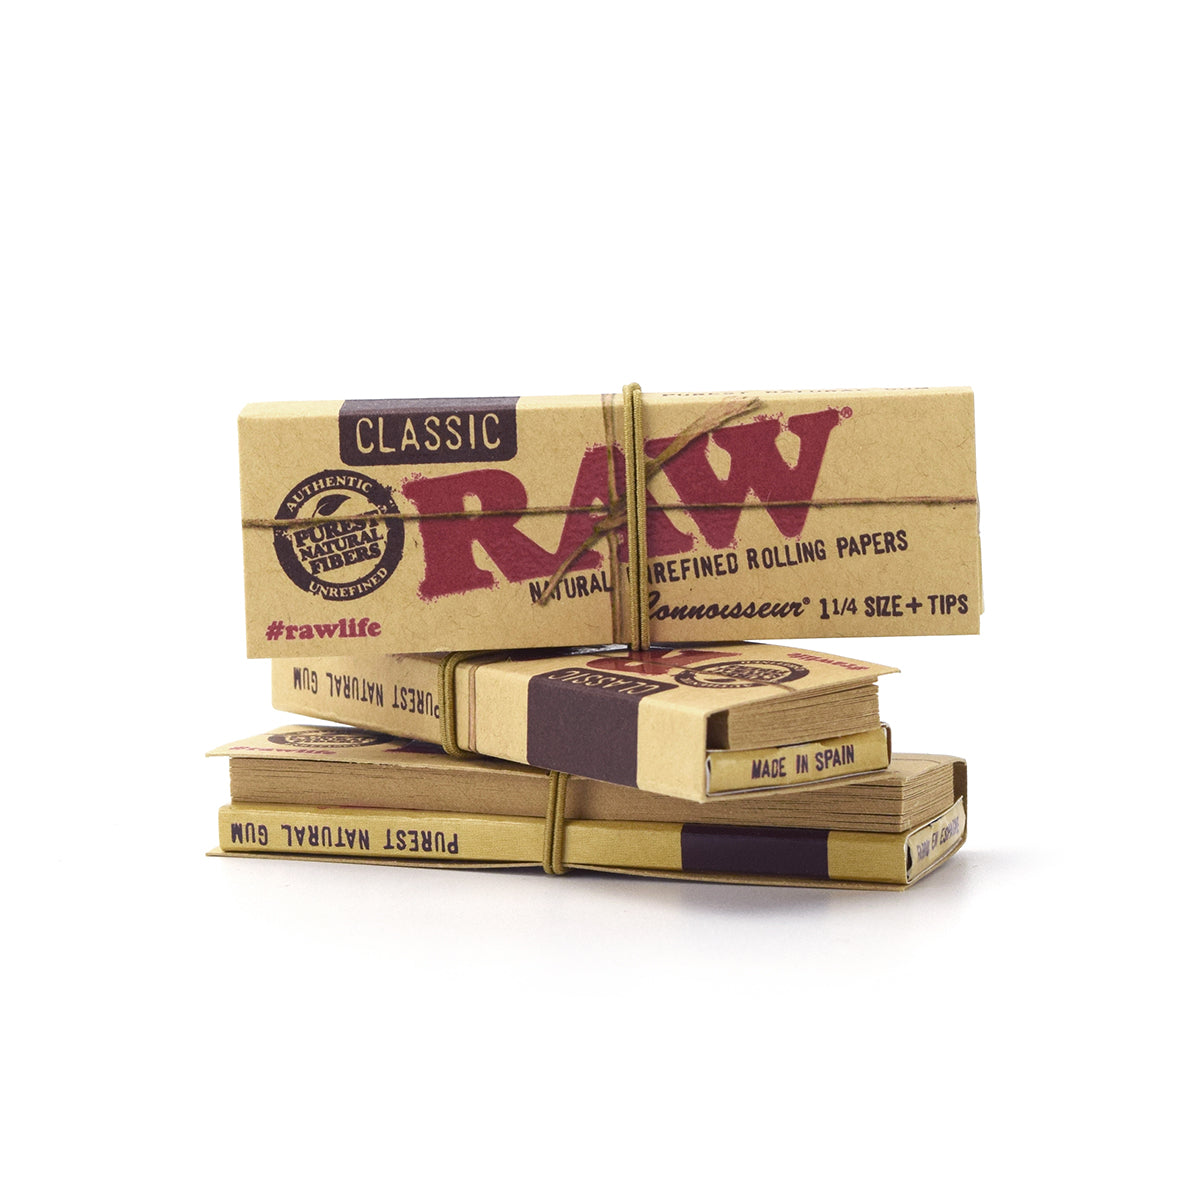 RAW Connoisseur 1 1/4 Medium Size Papers + Tips (1 Booklet) - Bittchaser Smoke Shop